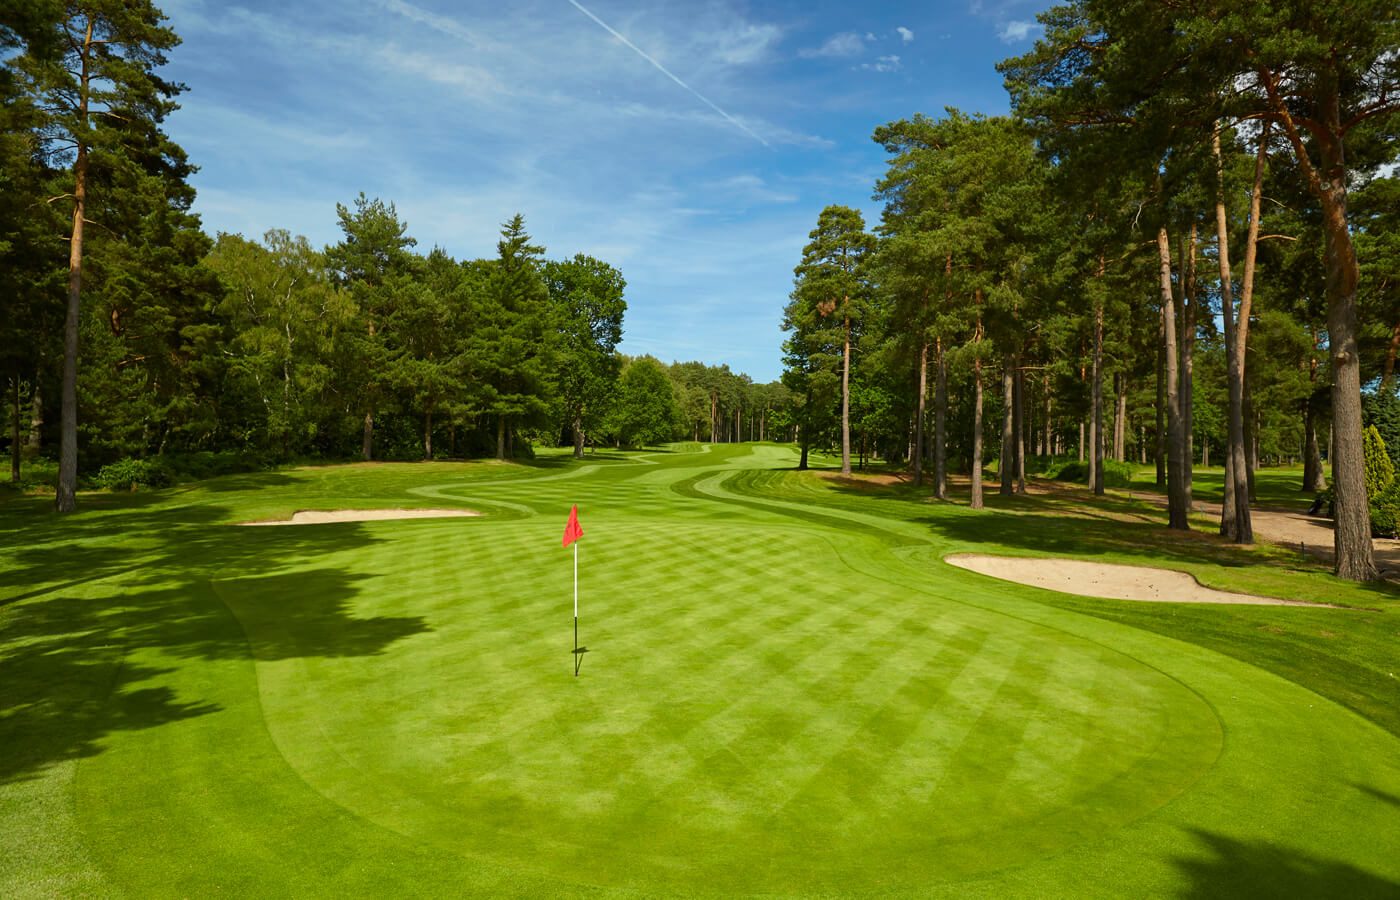 HUGE changes made to Wentworth with exclusive John Deere partnership